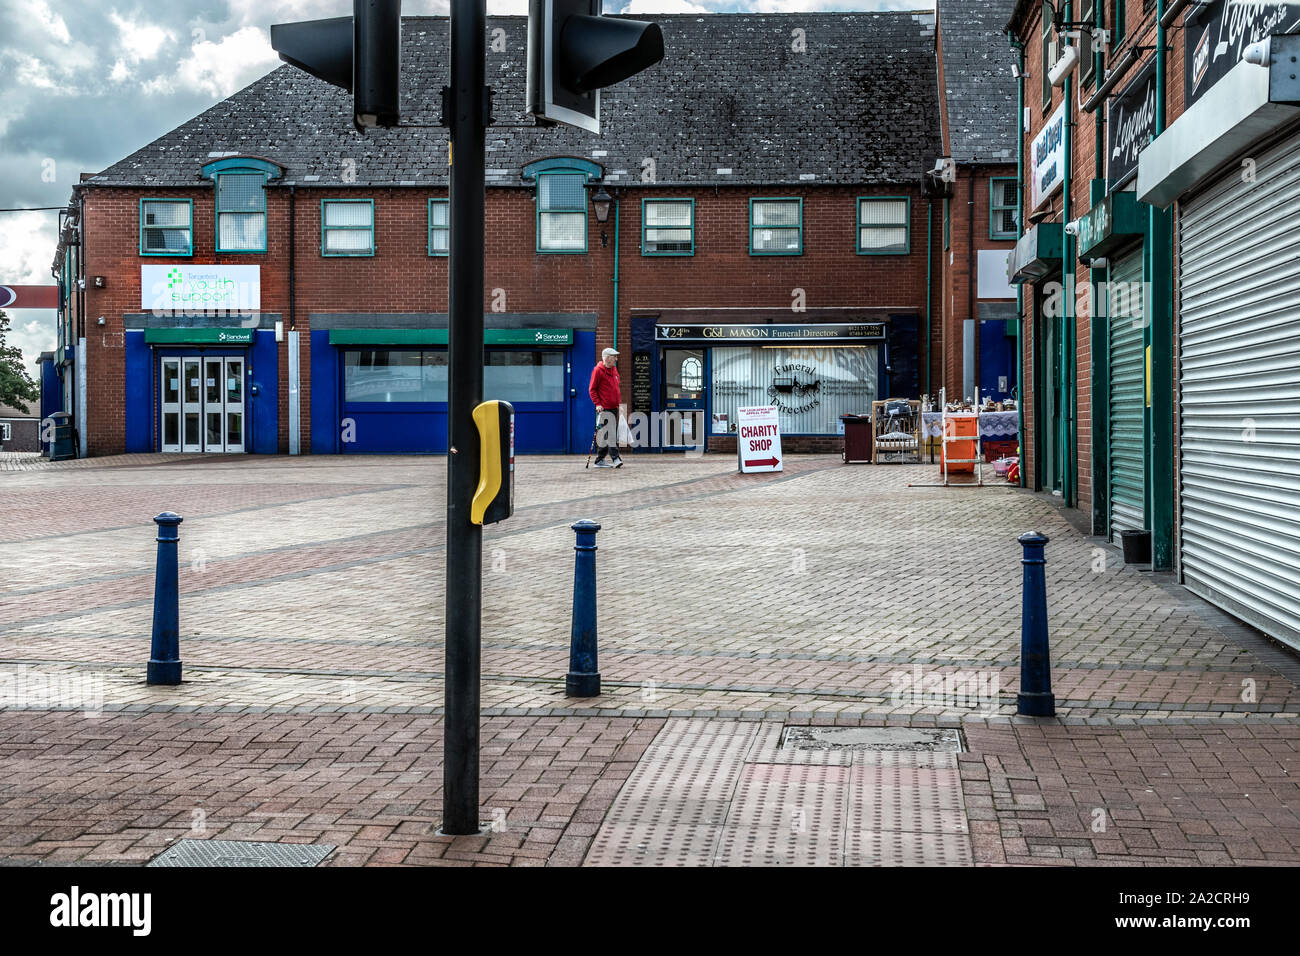 Elderly man walking towards a charity shop in the pedestrian precinct are of Tipton, northwest of Birmingham, West Midlands. The area is surrounded with closed down shops. Stock Photo